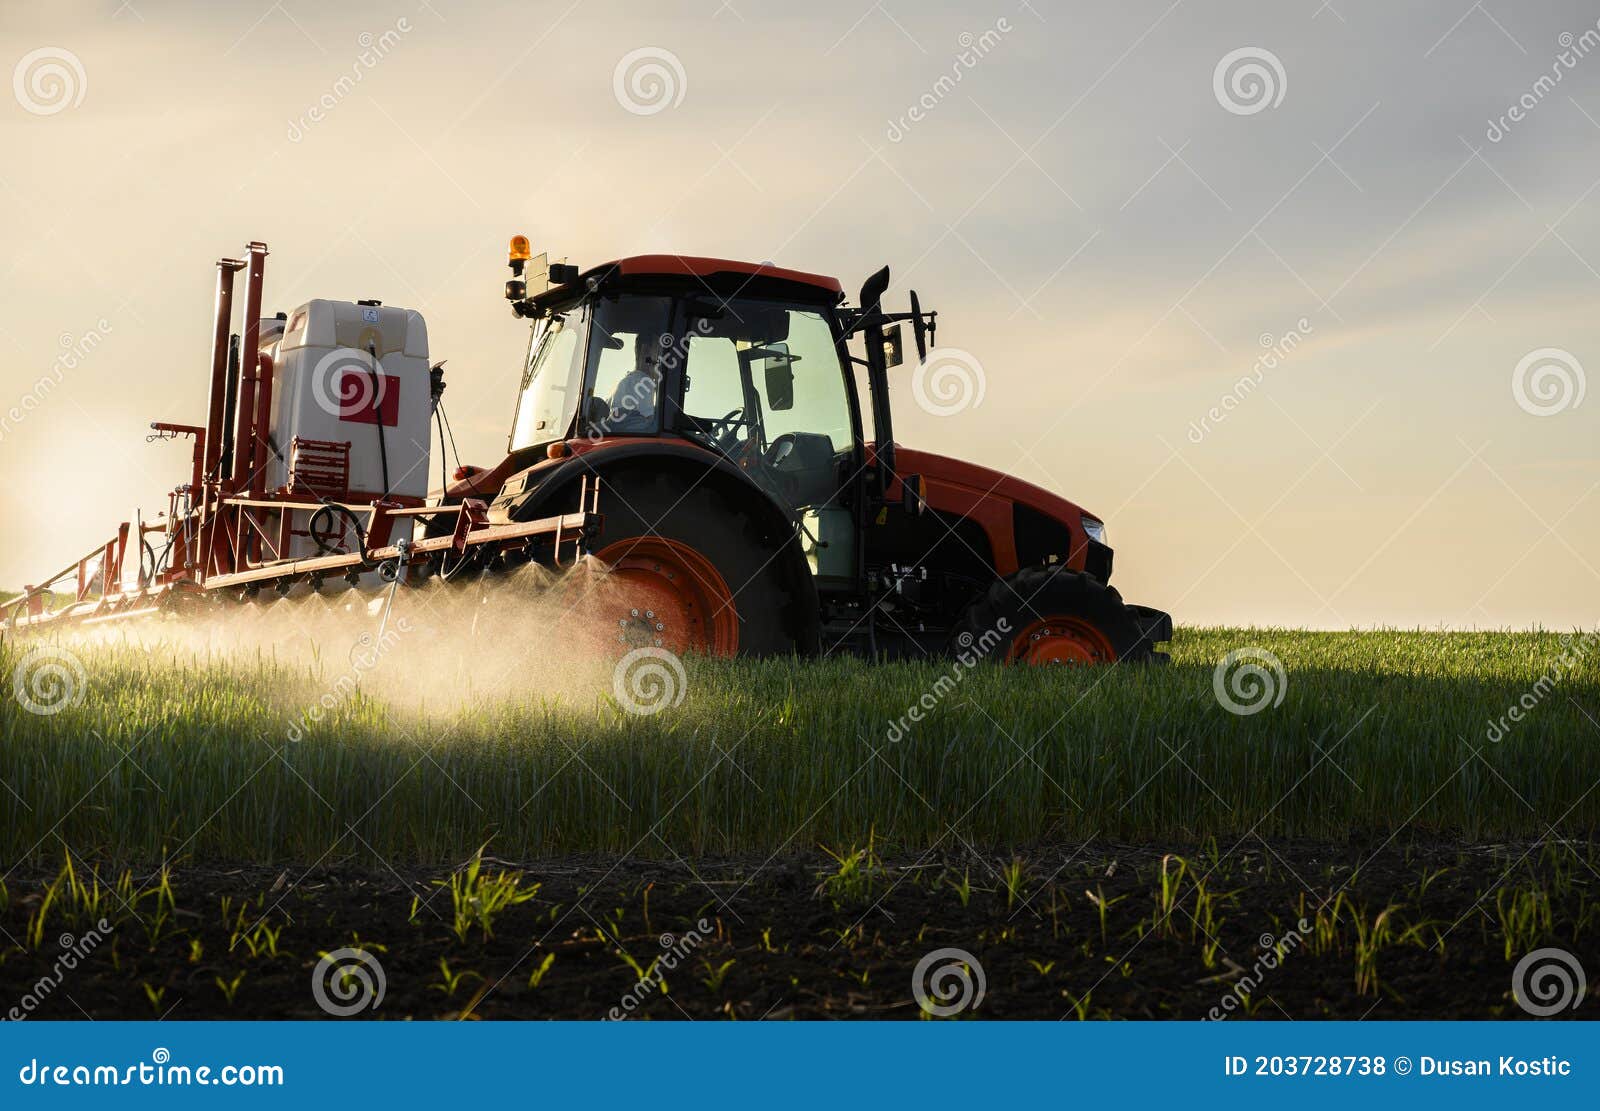 tractor spraying pesticides wheat field